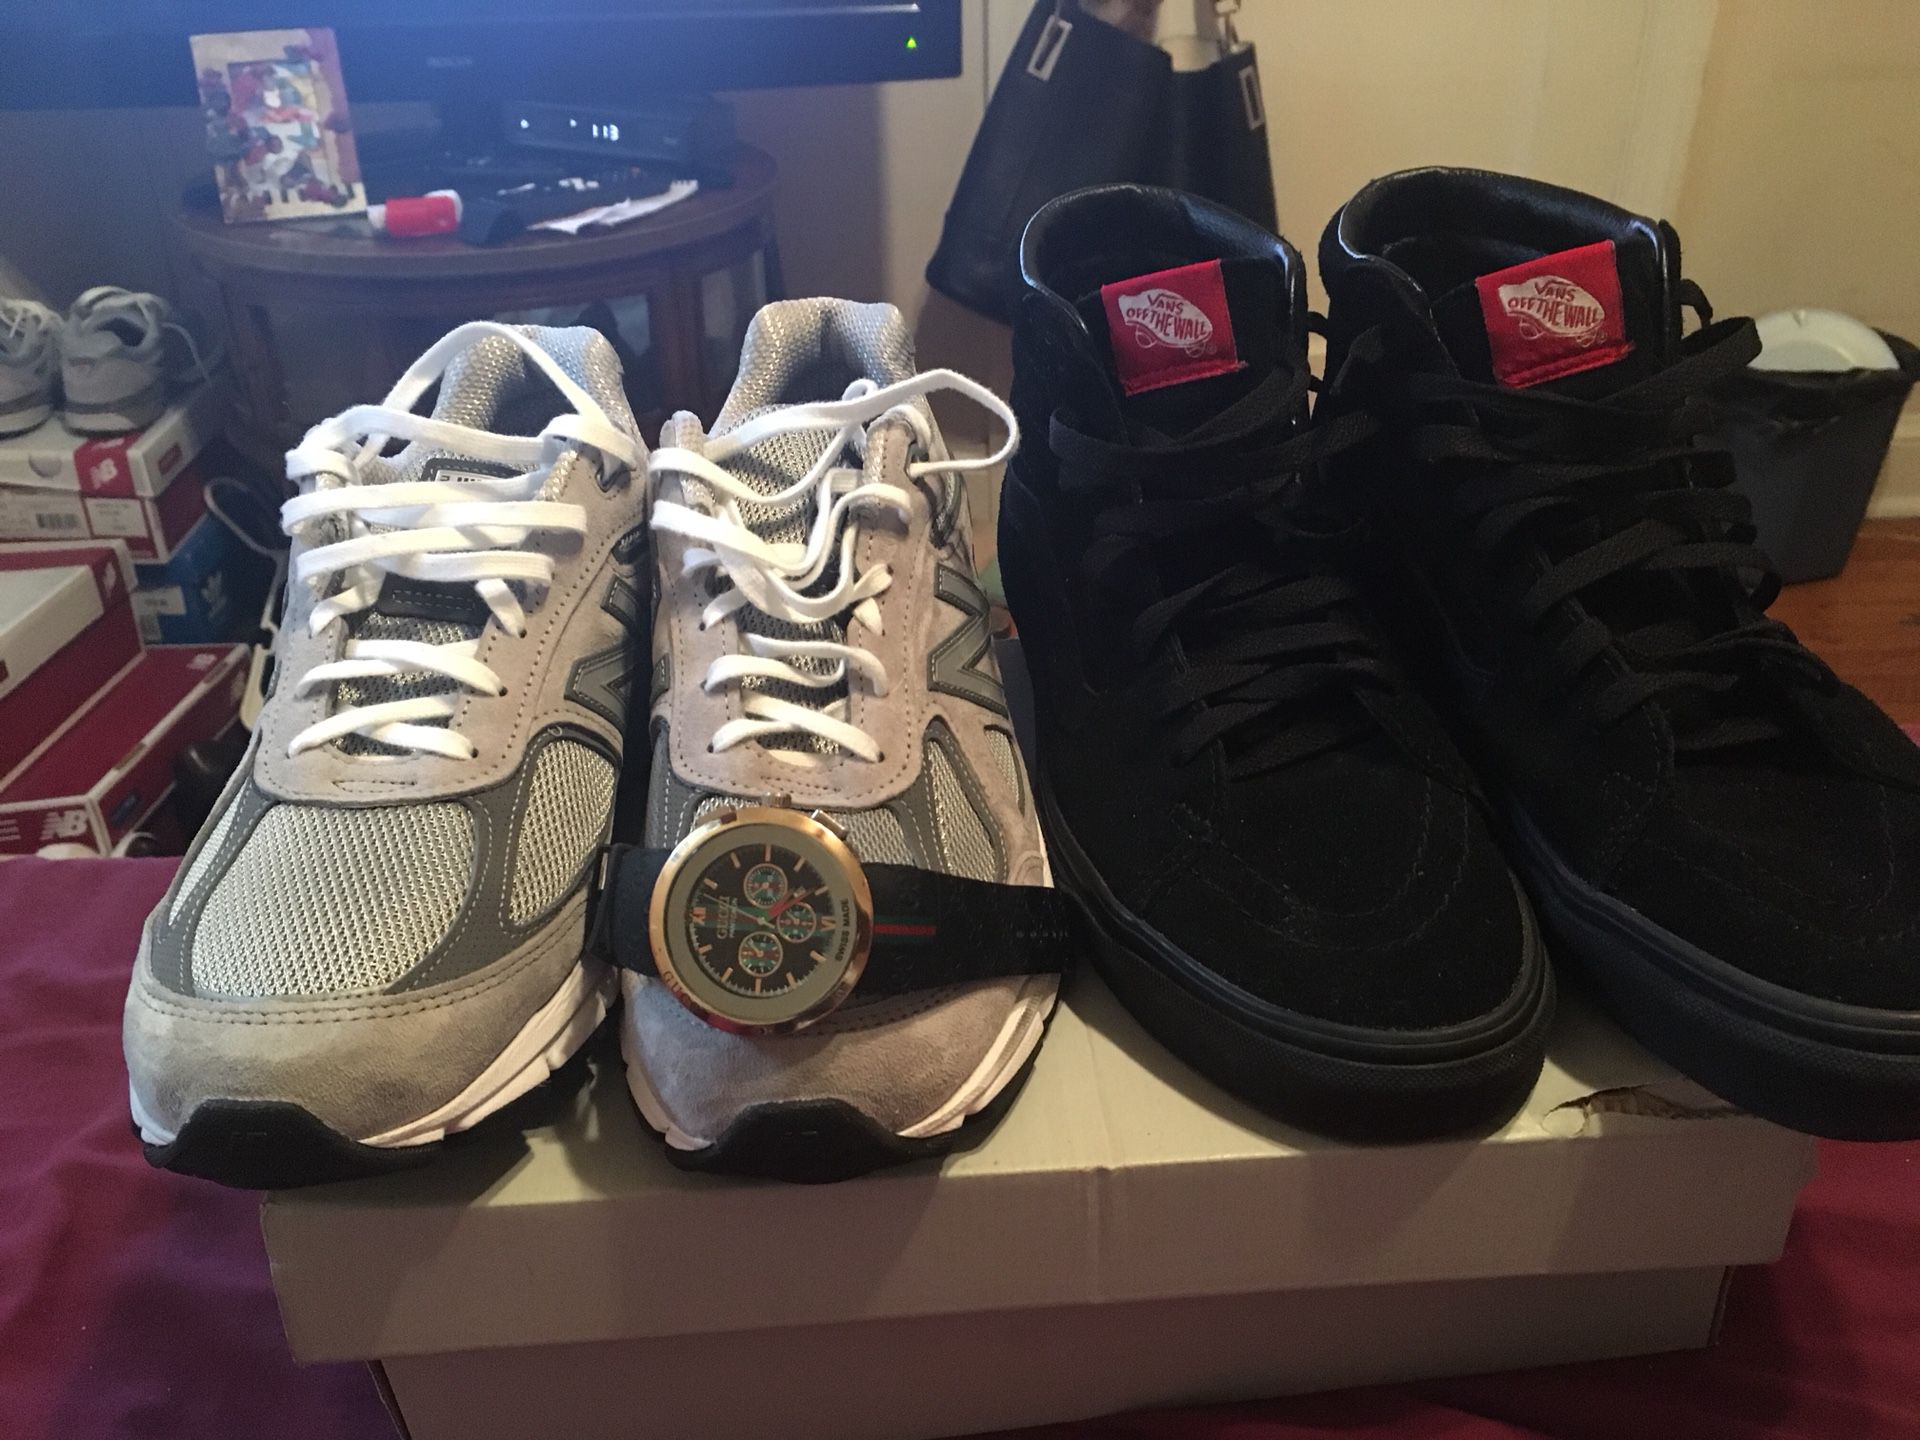 Size 9 990s New Balance and All Black Vans and a Real GUCCI Watch For $205